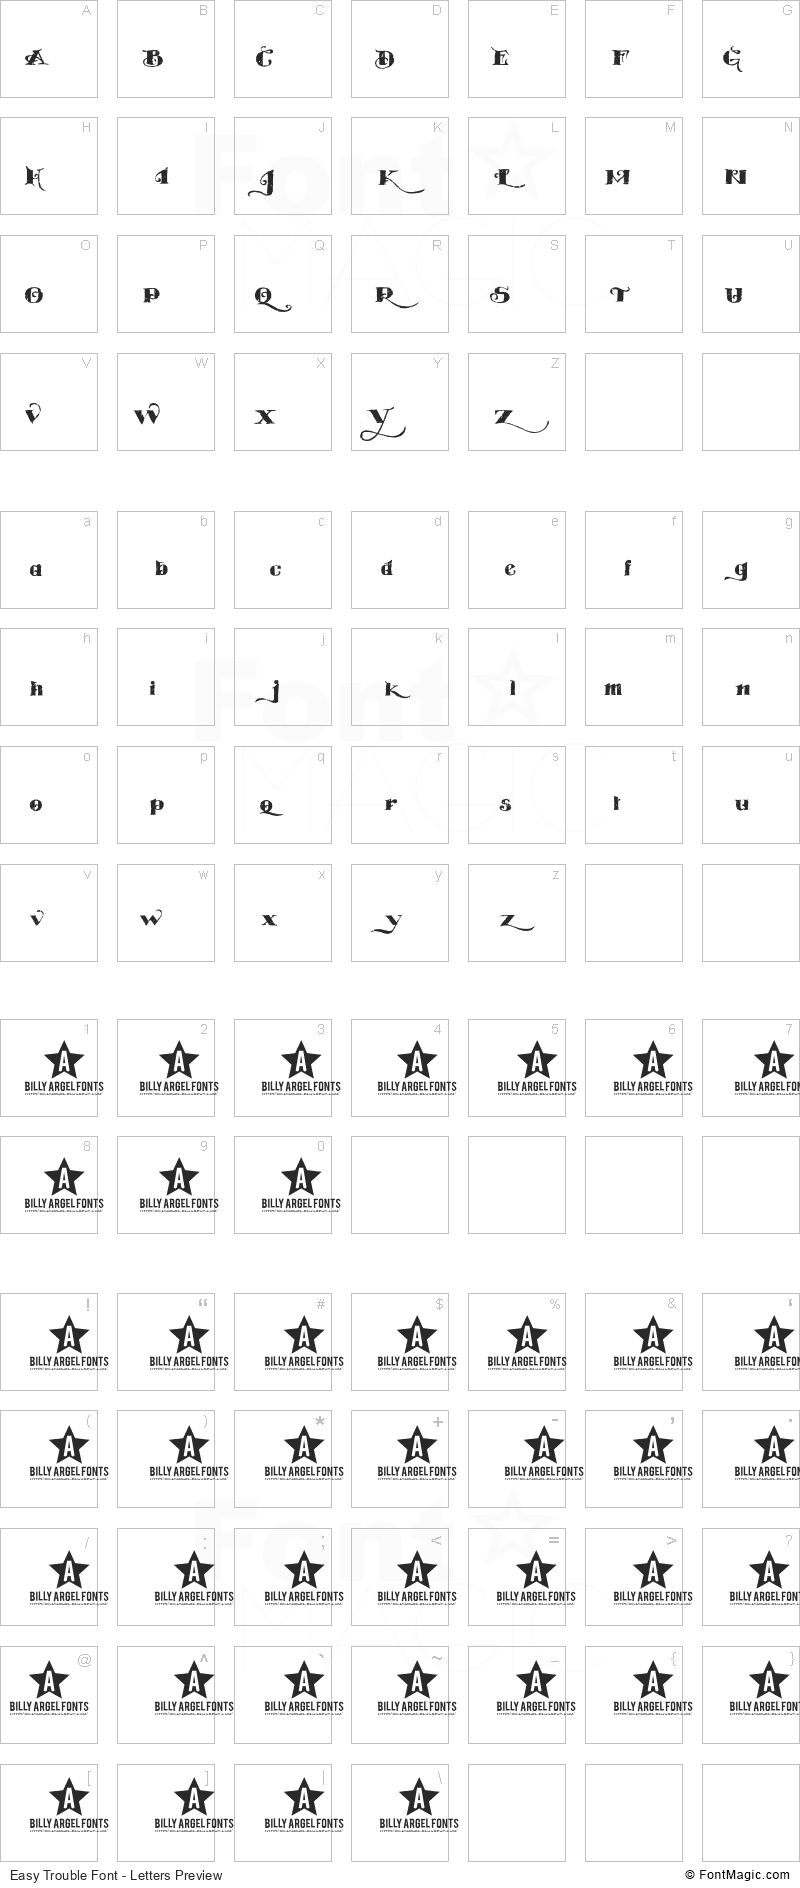 Easy Trouble Font - All Latters Preview Chart